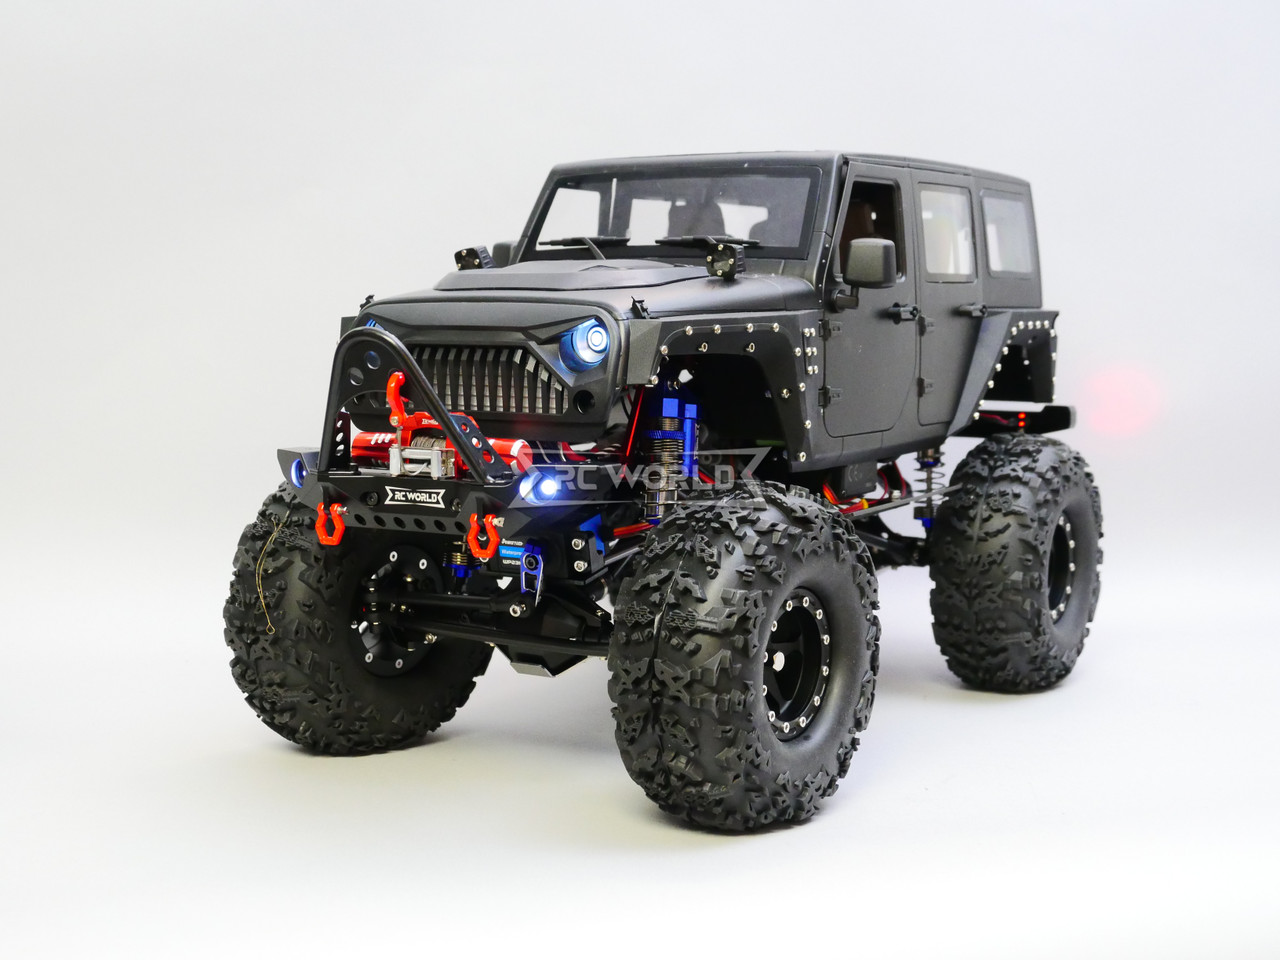 RC 1/10 Jeep Wrangler 2 Door Rock Crawler 4x4 RTR 285mm w/ LED Lights RED